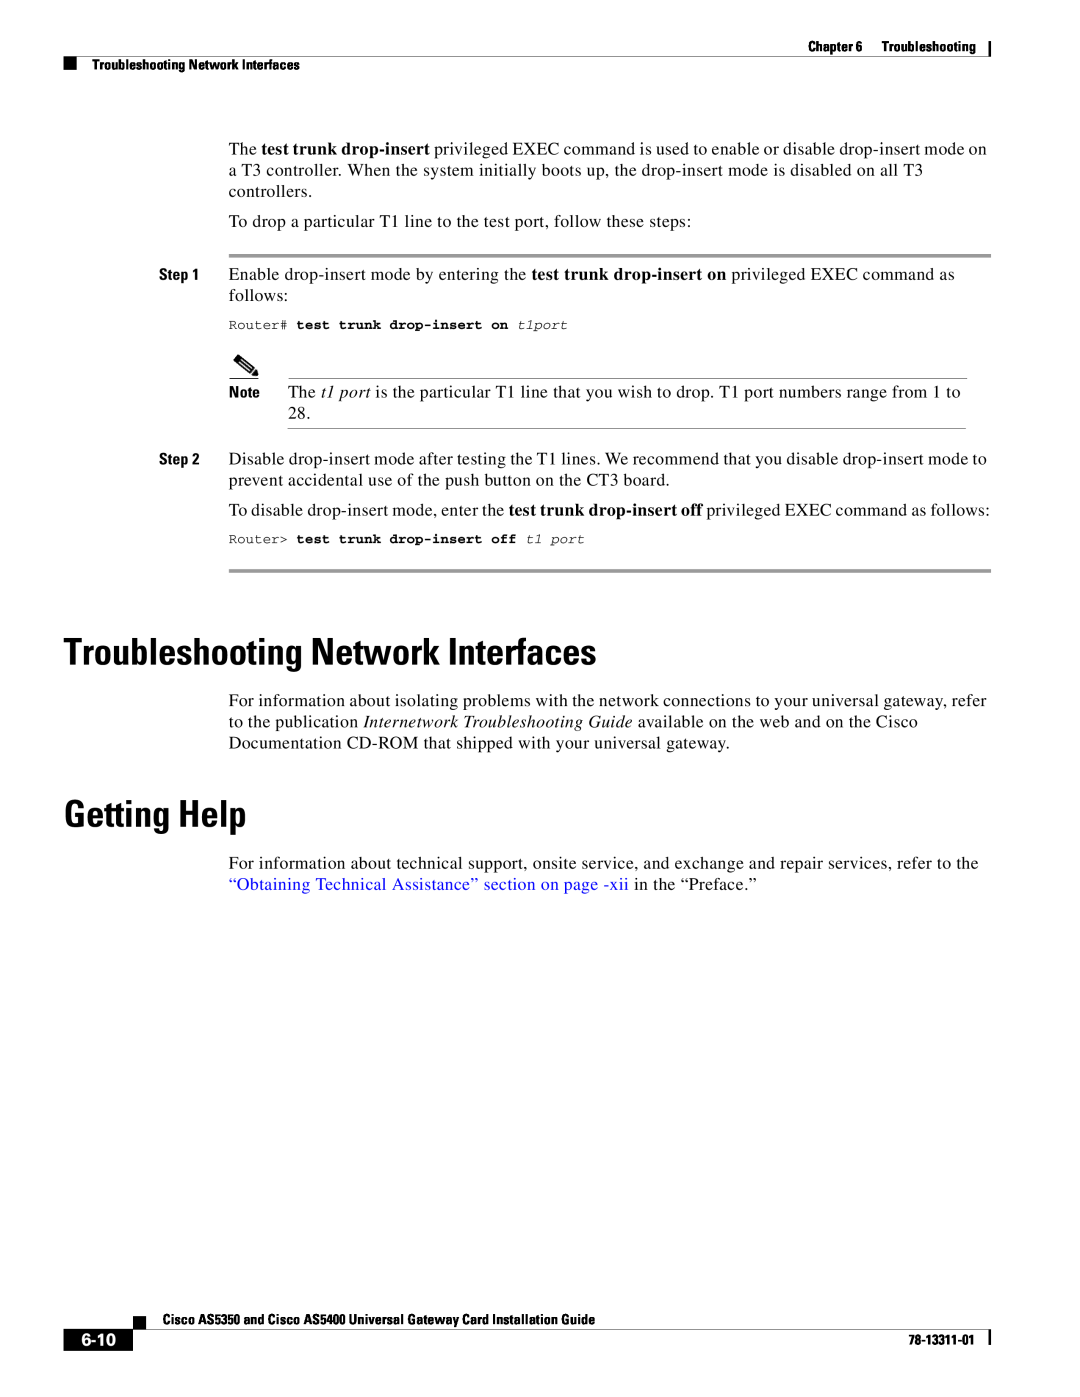 Cisco Systems AS5400 Troubleshooting Network Interfaces, 6-10, Getting Help, Router# test trunk drop-insert on t1port 